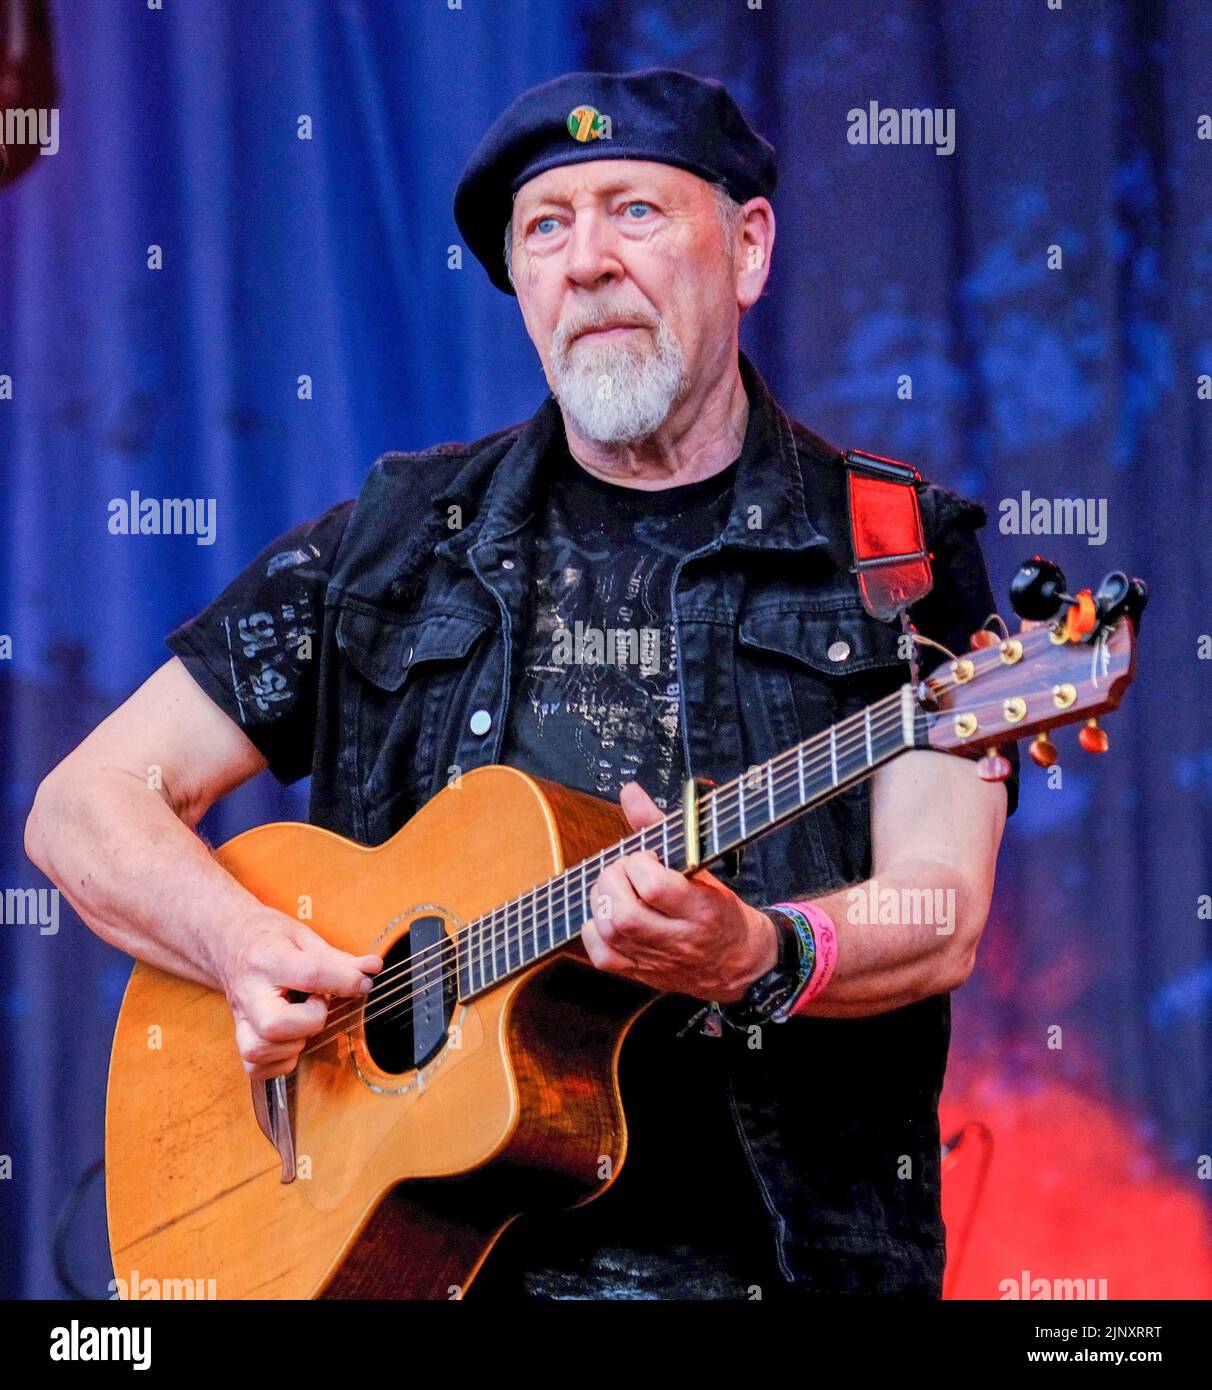 Cropredy Oxfordshire UK... Richard Thompson performing on the Main Stage at this years Fairport Cropredy Convention. Credit: charlie bryan/Alamy Live News Stock Photo